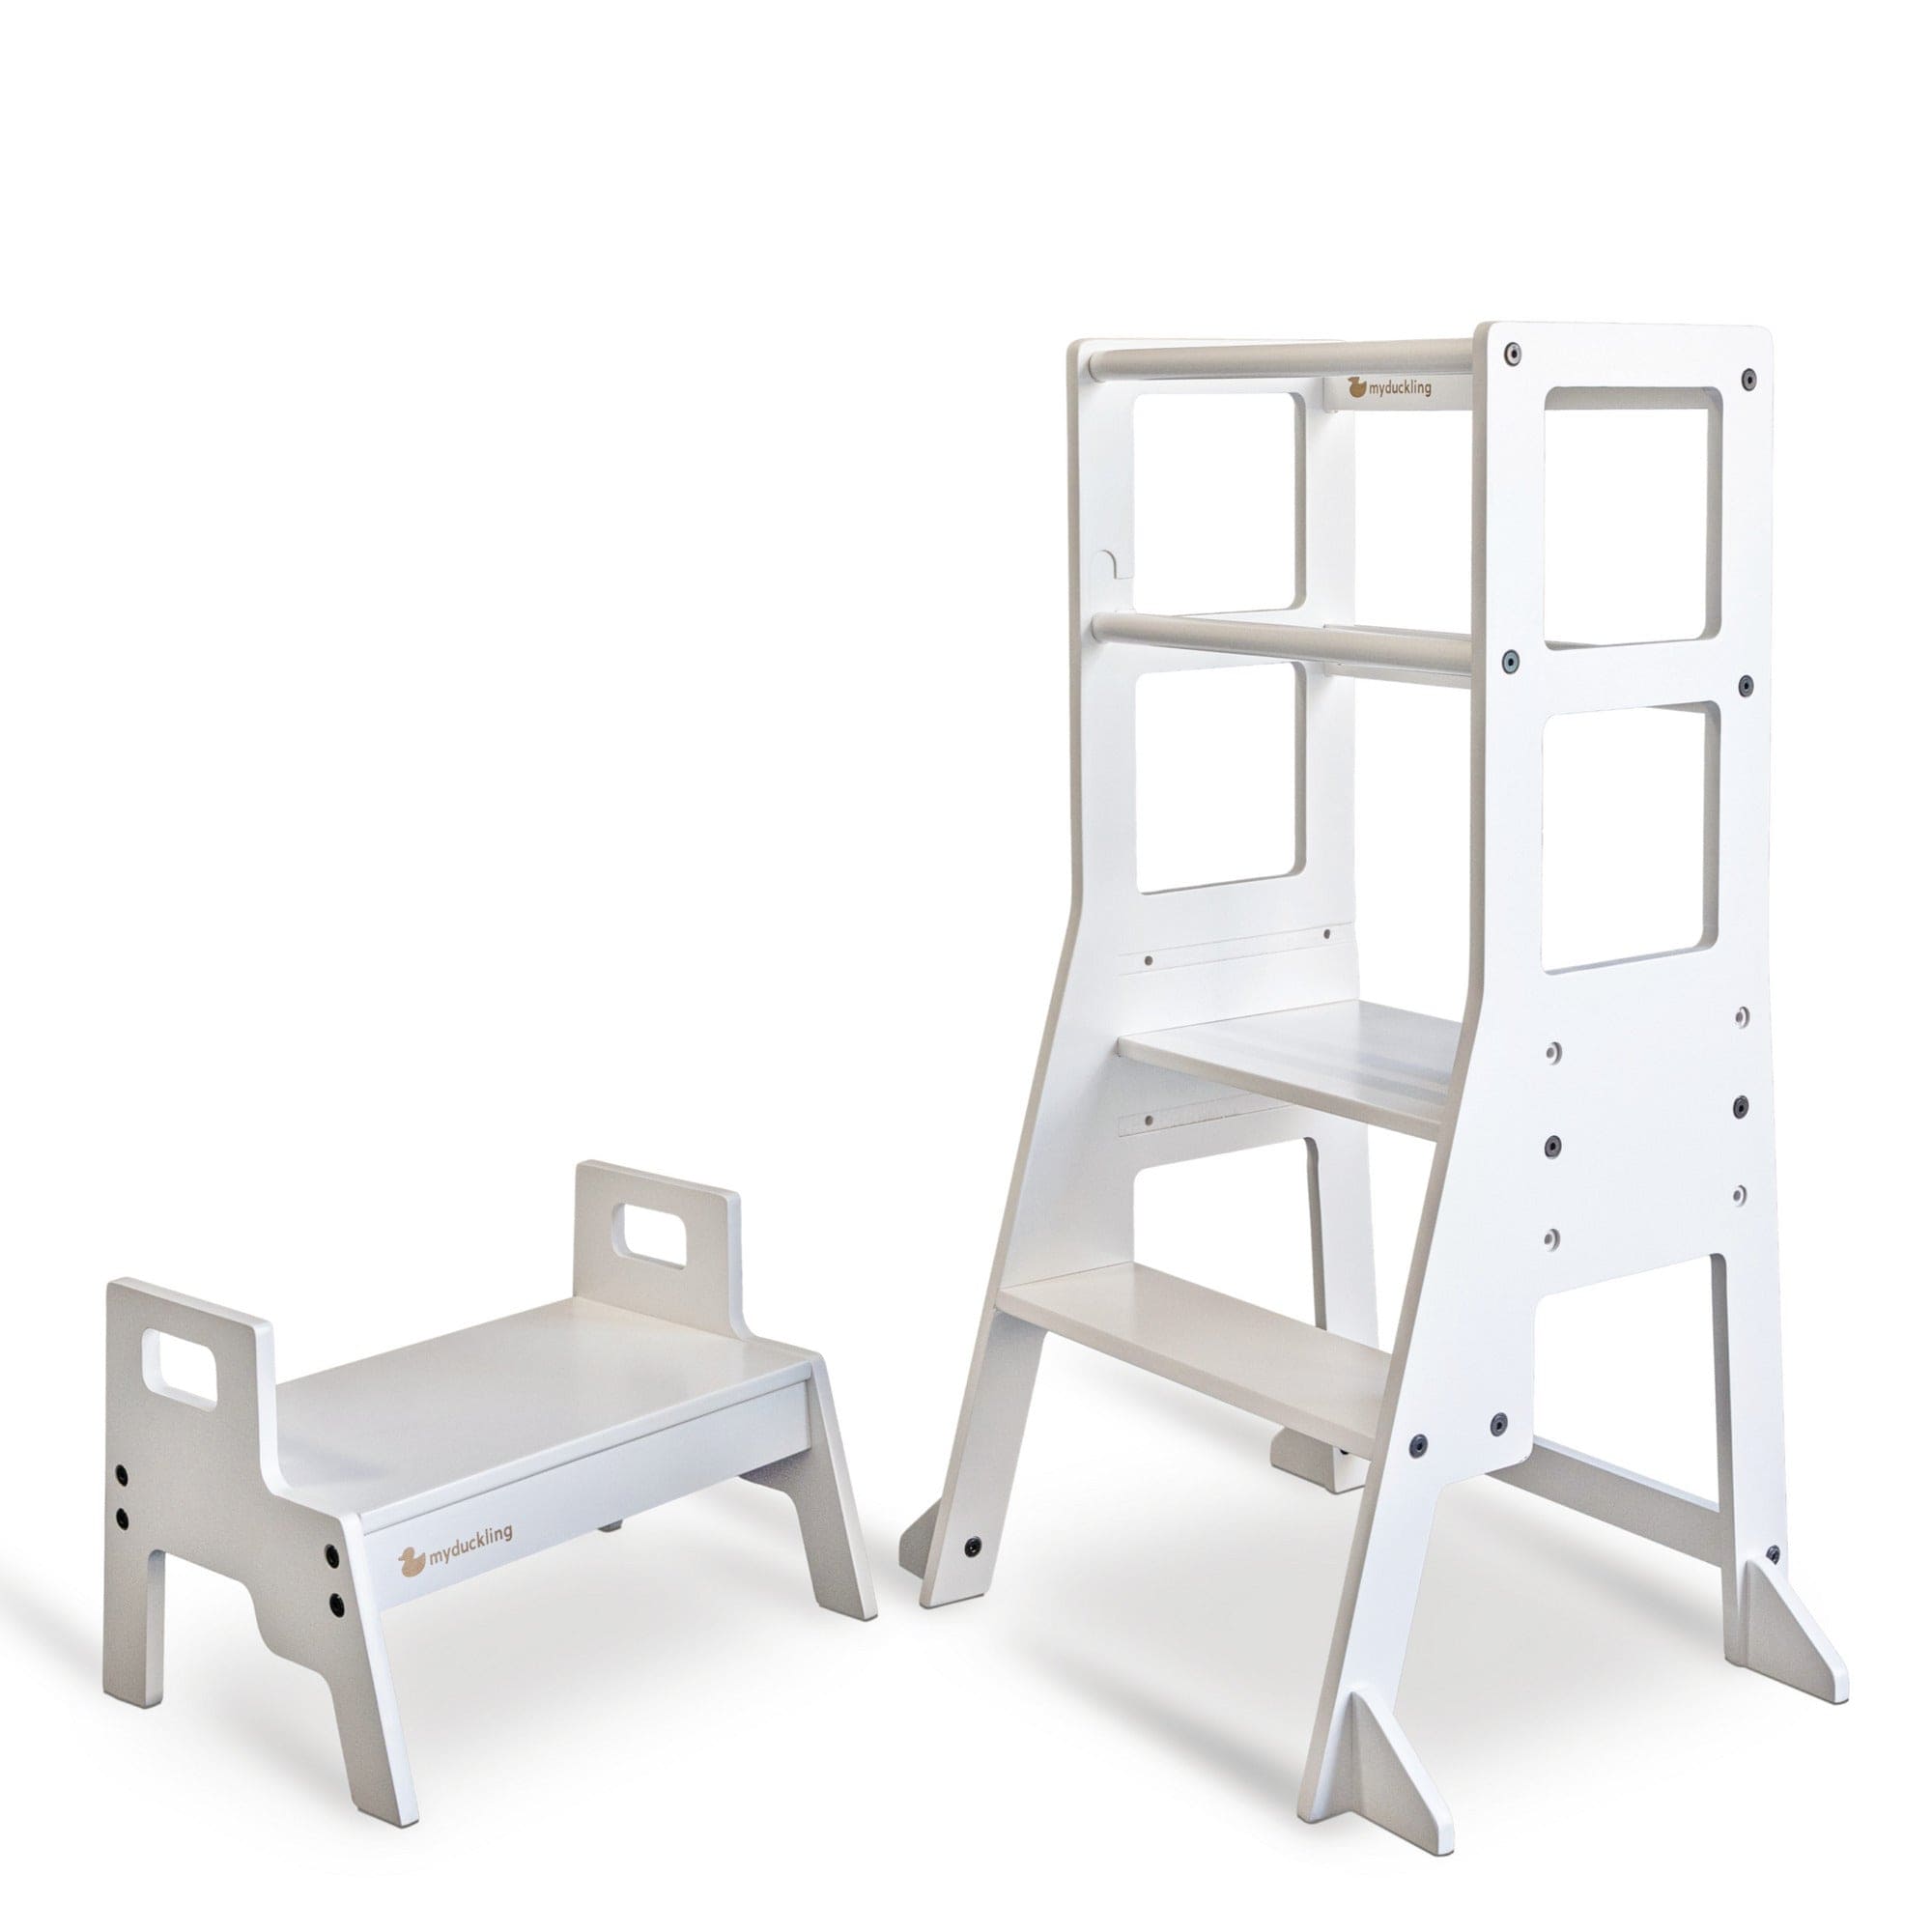 My Duckling JALA Deluxe Adjustable Learning Tower - White